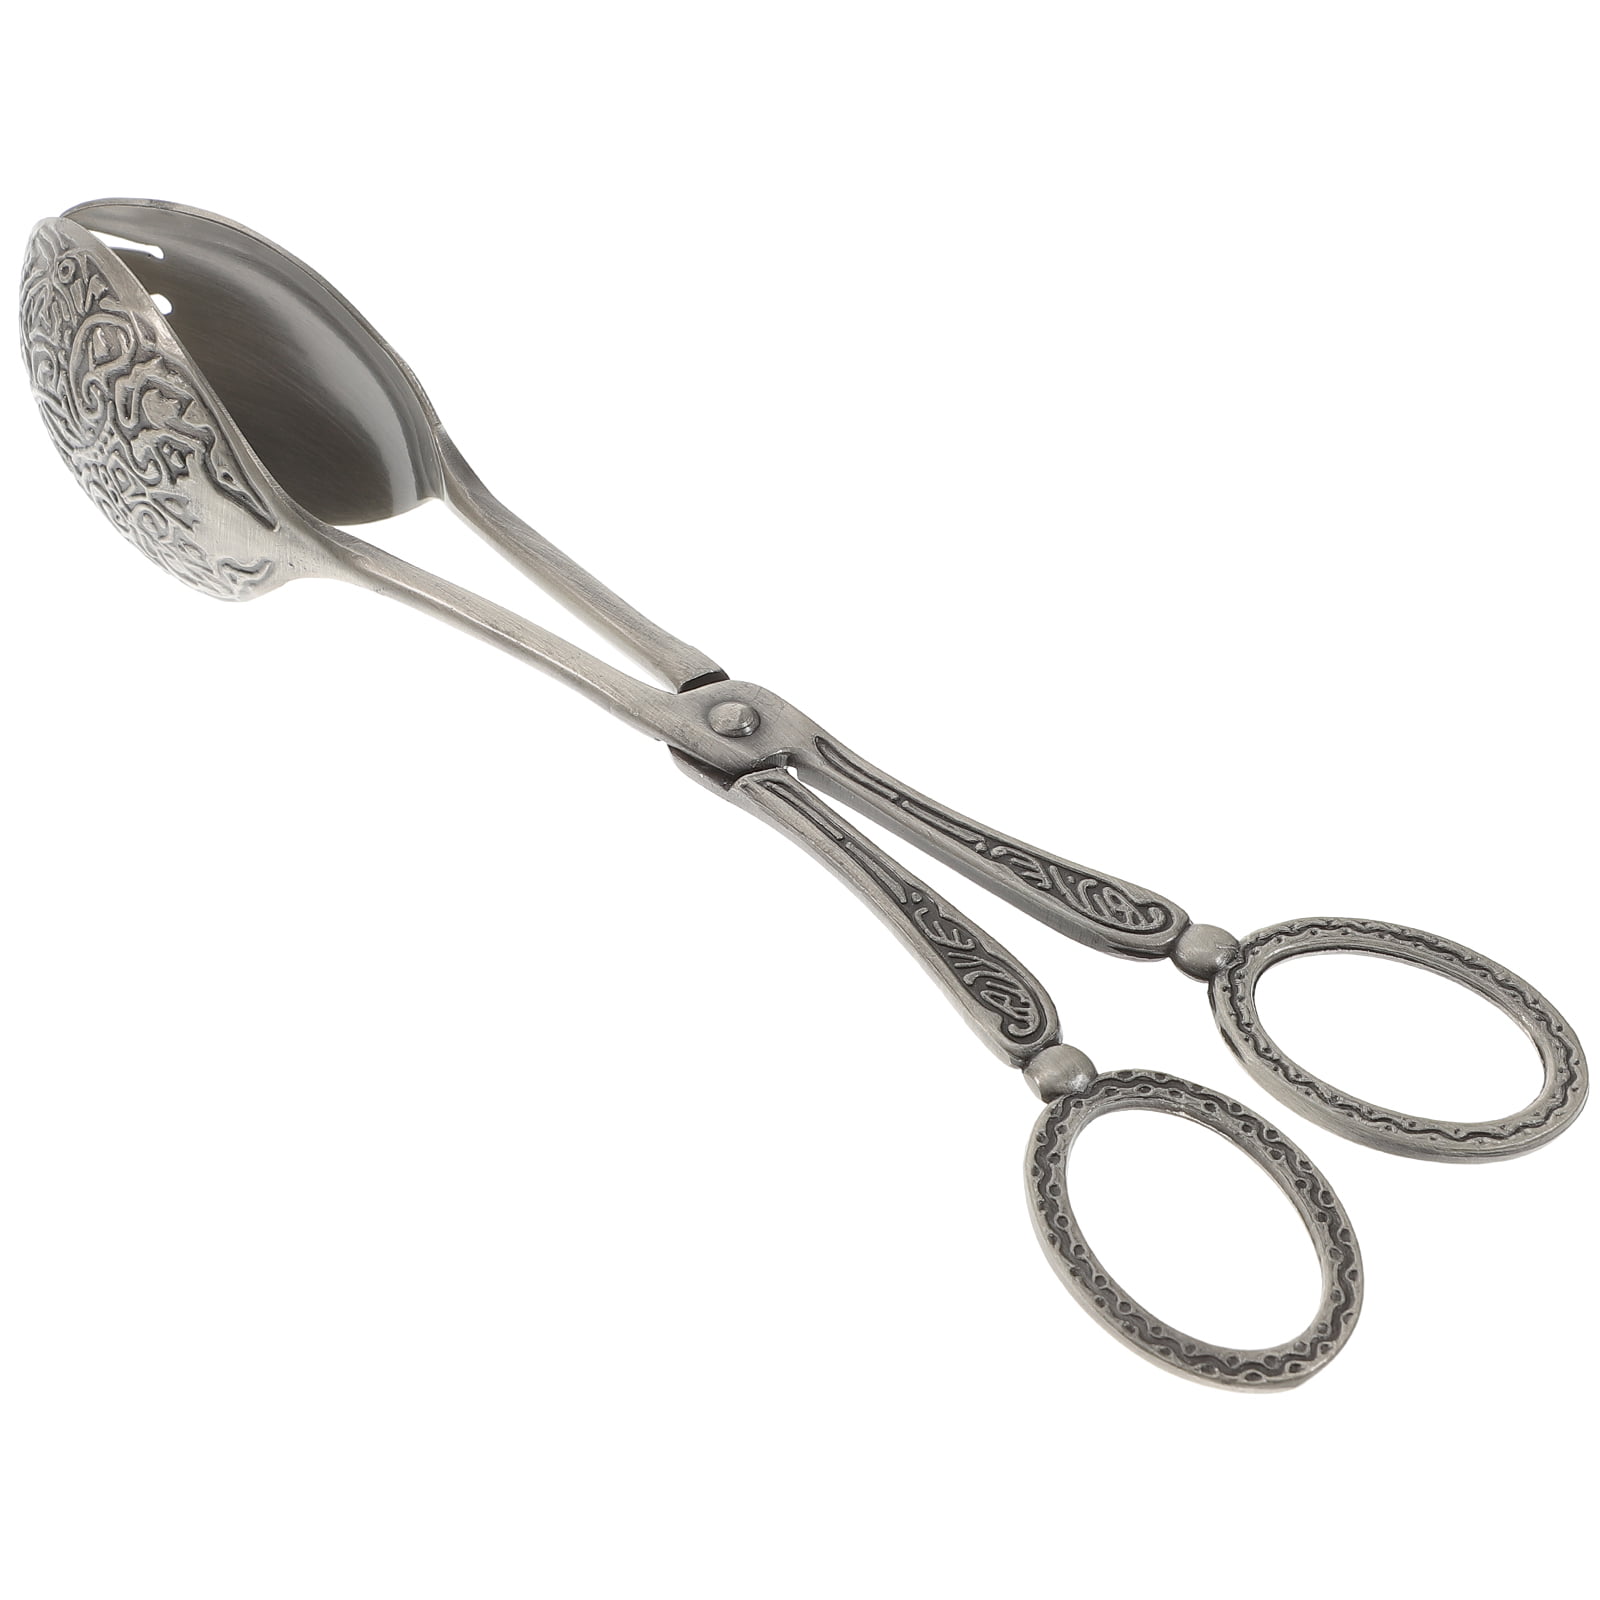 Stainless Steel Salad Tong - L&B Concepts